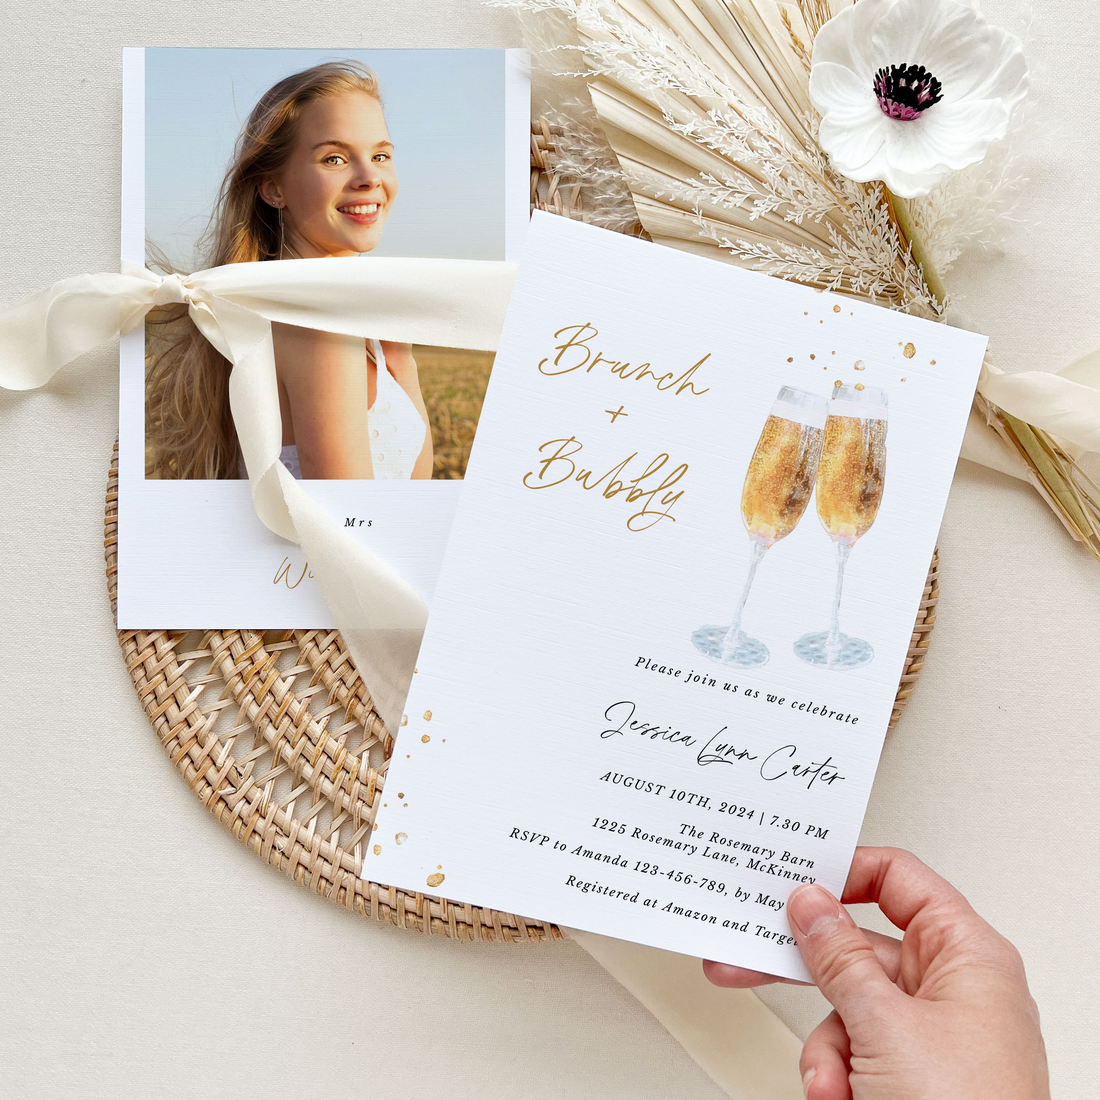 Brunch and Bubbly Invitation Template